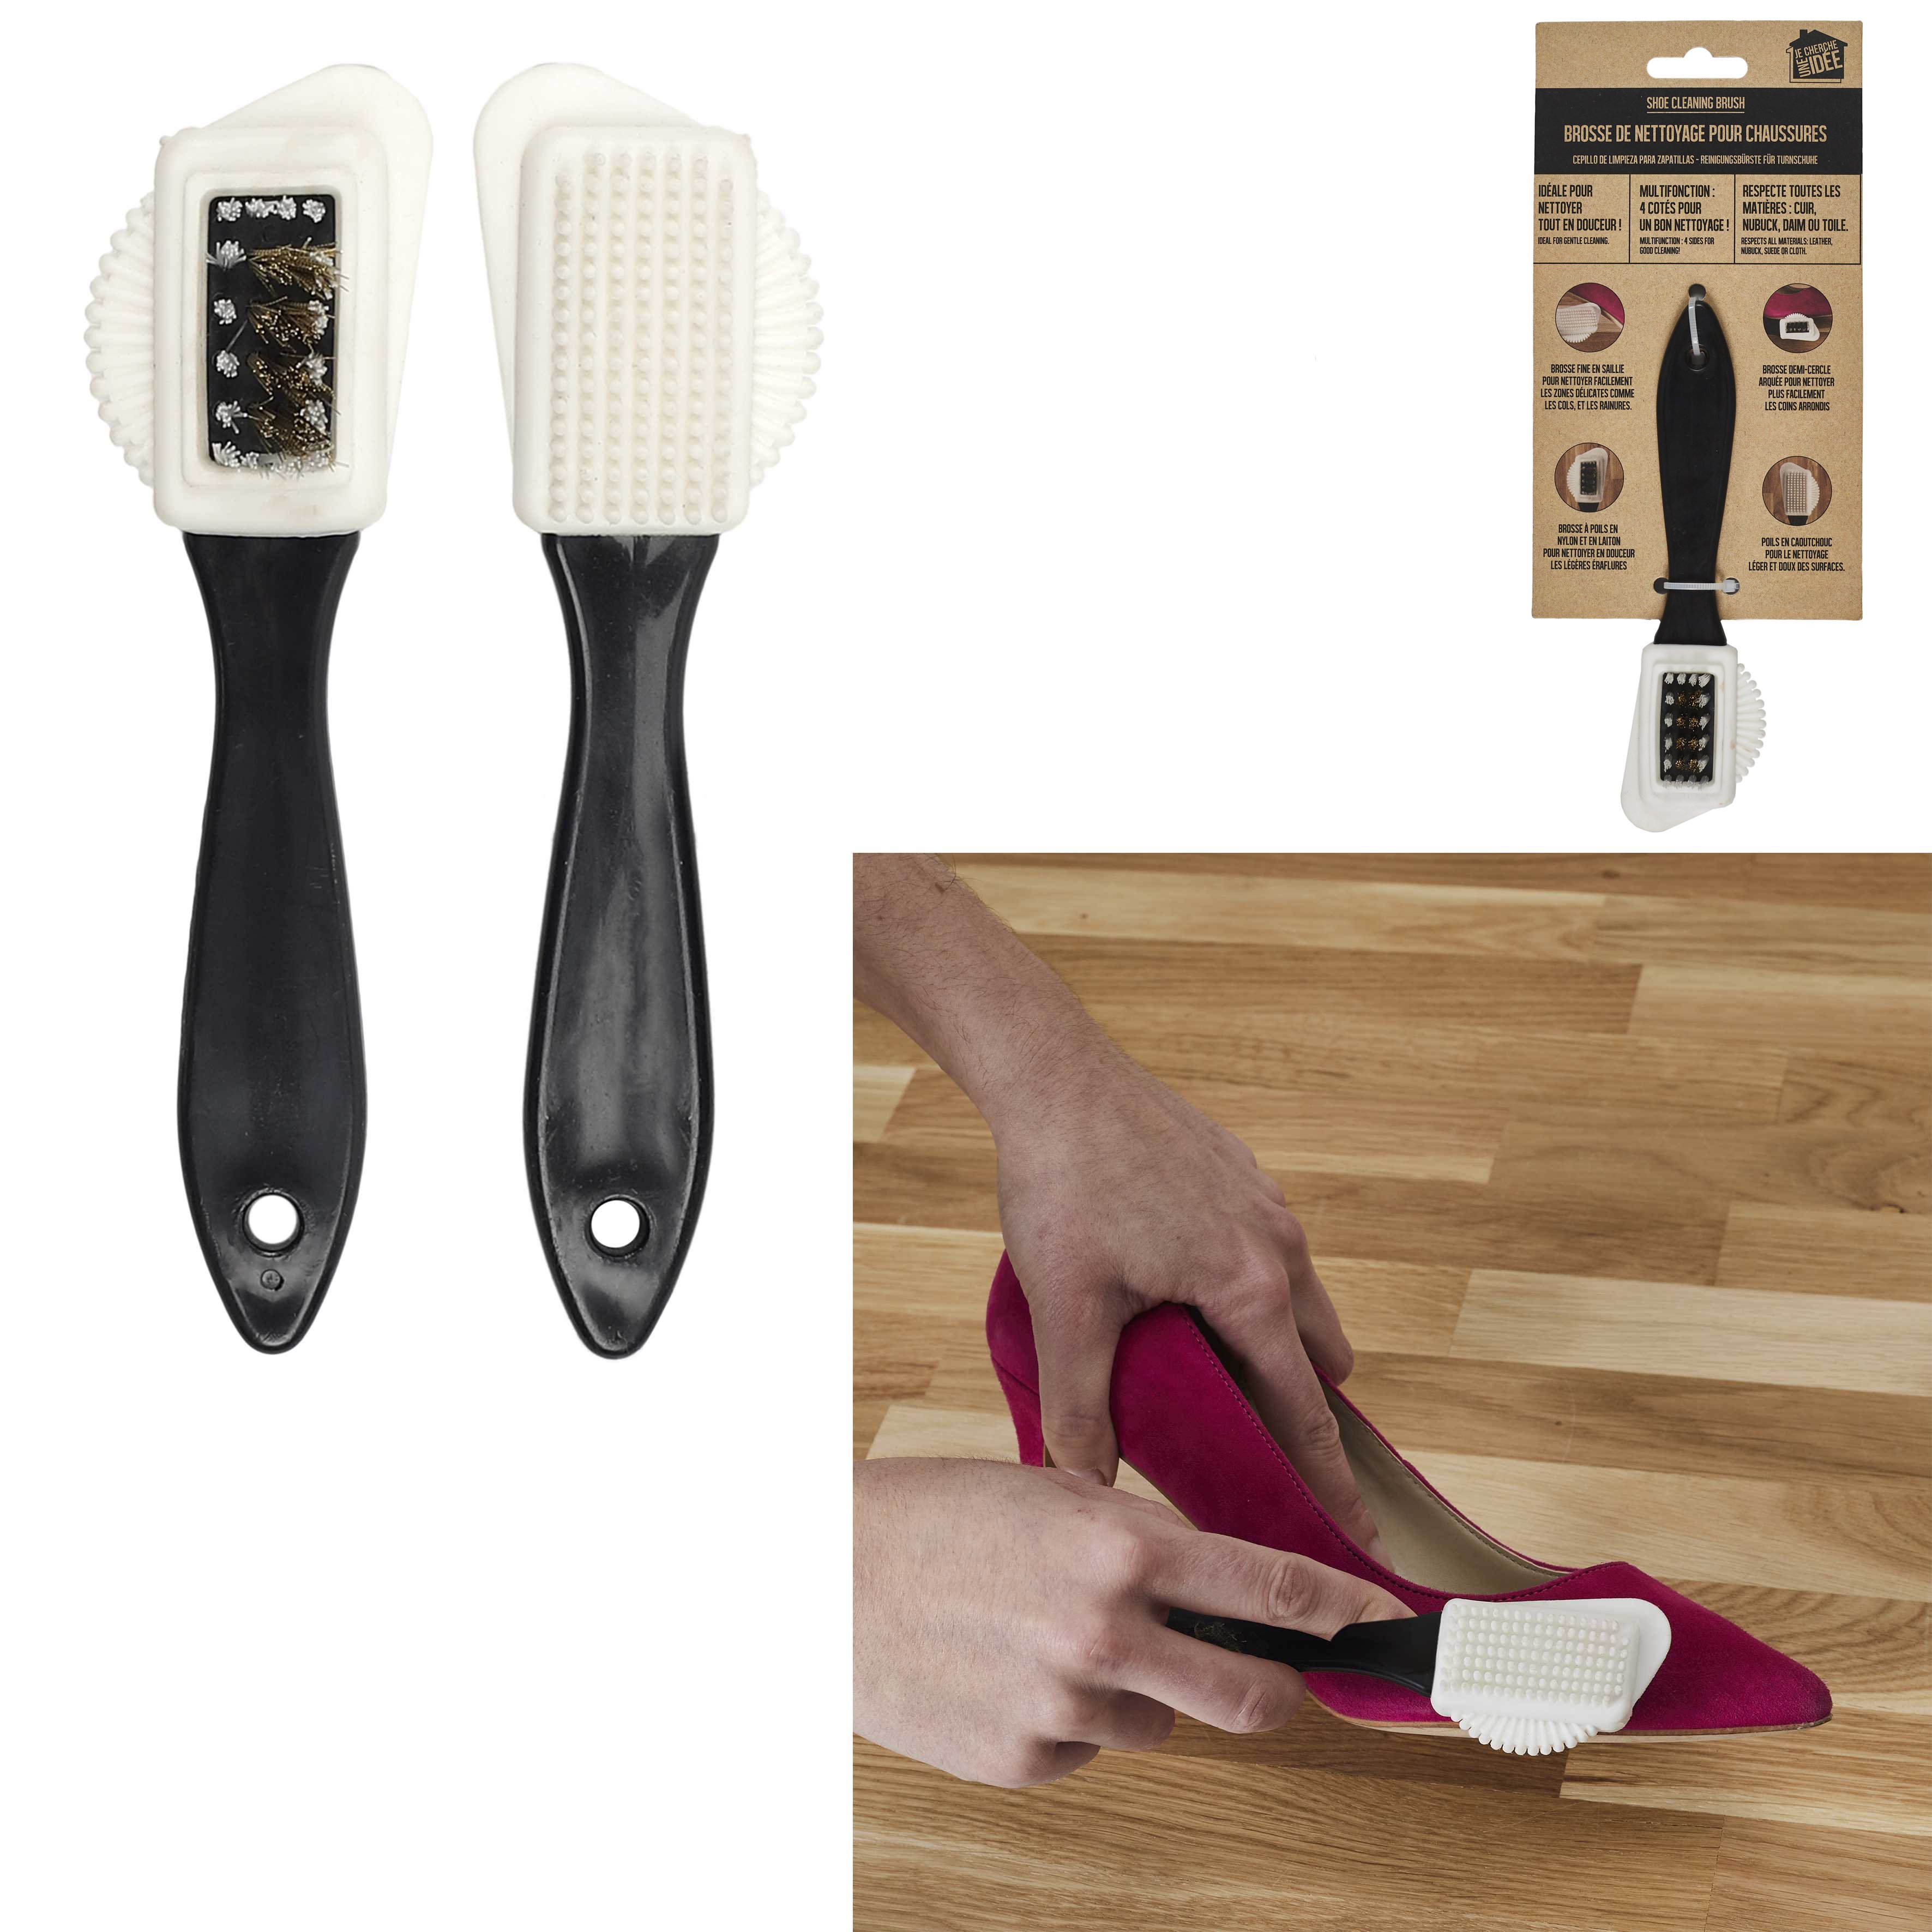 BROSSE NETTOYAGE CHAUSSURES